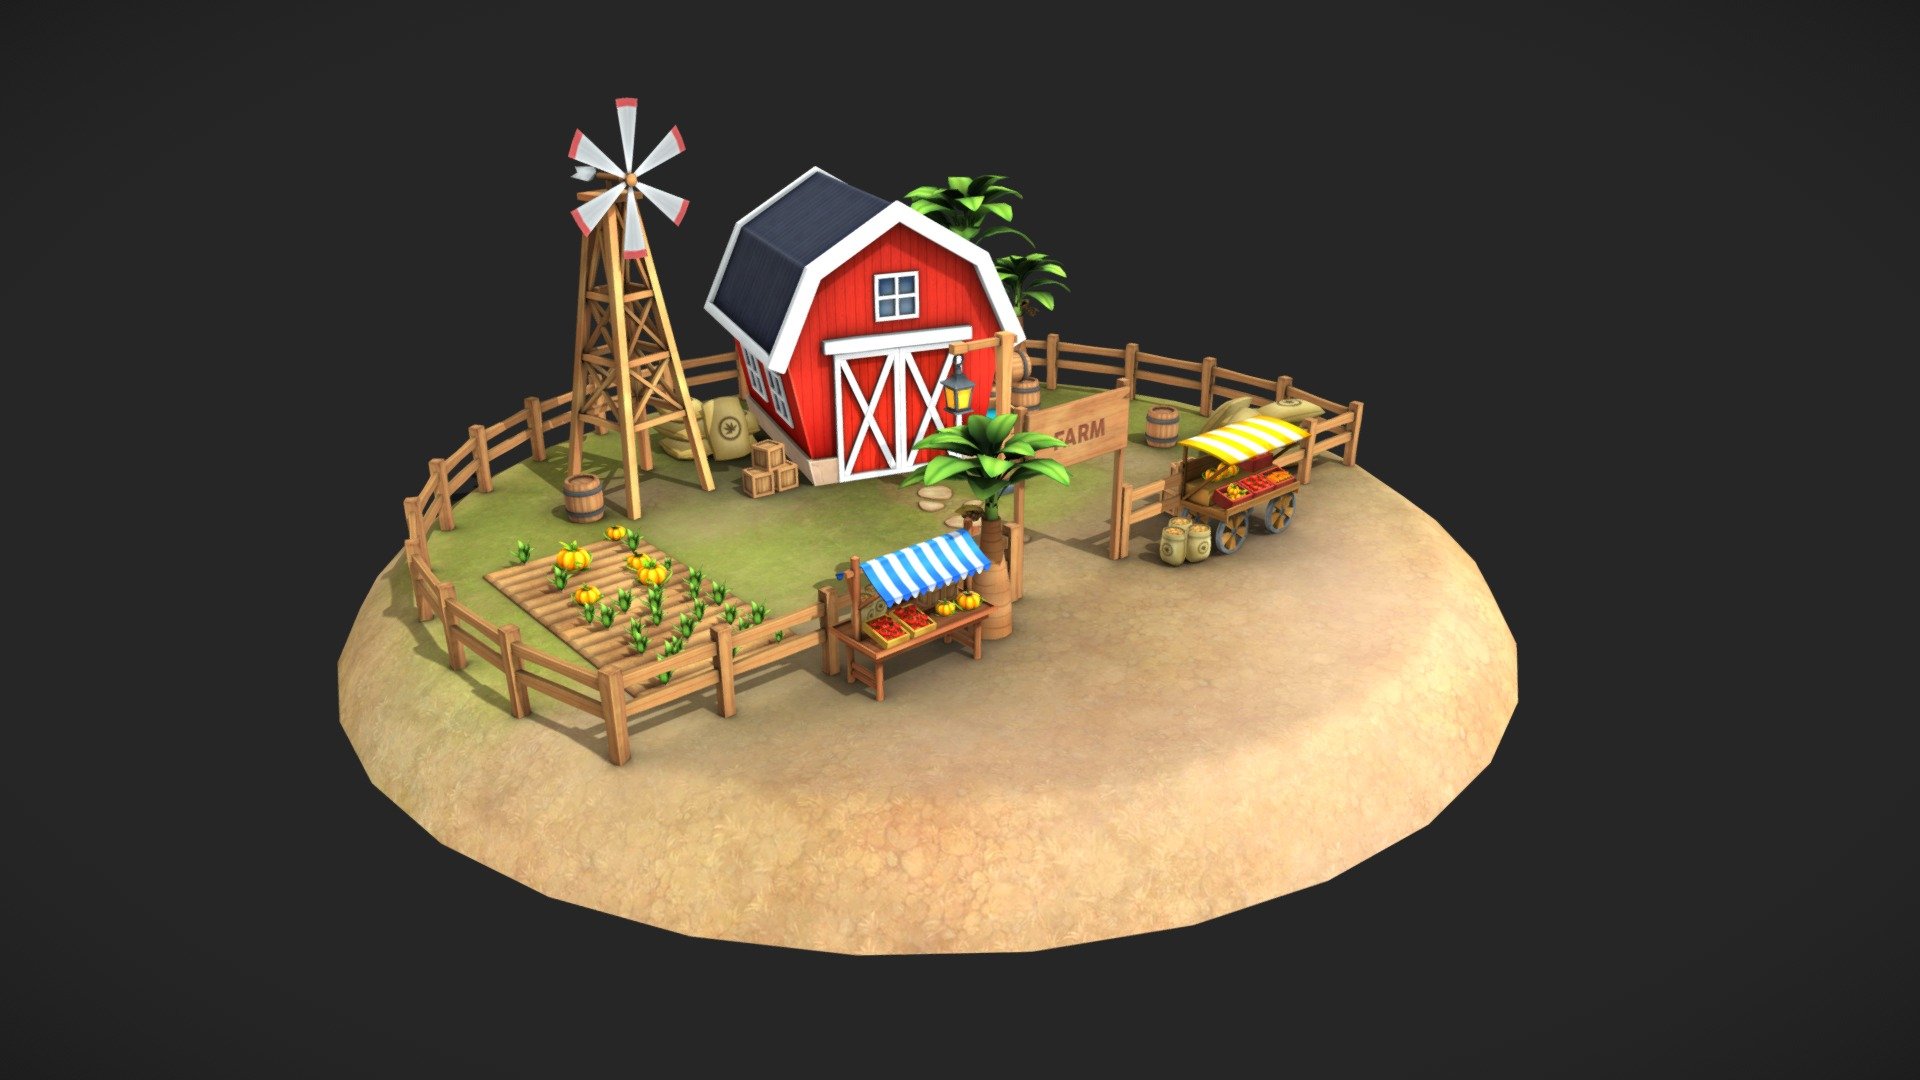 Game Ready, High-Quality Low Poly Models of Toon Farm Environment. Models are built with realistic proportions and correct Geometry.

Features :-



Completely Unwrapped different Farm assets



Consists of 8 High Quality and Detailed Textures along with 8 AO Maps.



All Materials Assigned Properly.



Mill Fan is Animated.



Models proportioned to Real world Size.



Pack Contains :-

MODELS :


Toon Farm : Packed with 20+ amazing different Models.

TEXTURES :


All Textures with 2048 X 2048 Resolution.

POLYGONS COUNT :

Crate: 300, Barrel: 1240, Farm soil: 196, Stones: 700, Sack: 256

Sack Open: 524, Box 1: 140, Box 2: 132, Cart 1: 160

Cart 1 Wheel: 1120, Cart 2: 1078, Water Tub: 124, Board: 520

Fence: 468, Barn: 1554, Tree: 9212, Plant: 1076, Pumpkin: 2924

Carrot: 399, Tomato: 896, Lamp Base: 344, Lamp: 764

Lamp Glow: 8, Mill Base: 620, Fan: 96, Rotator: 68

We would love to hear your rating and comments.

Support email: tgamesassets@gmail.com - Toon Farm Environment - Buy Royalty Free 3D model by TGamesAssets 3d model